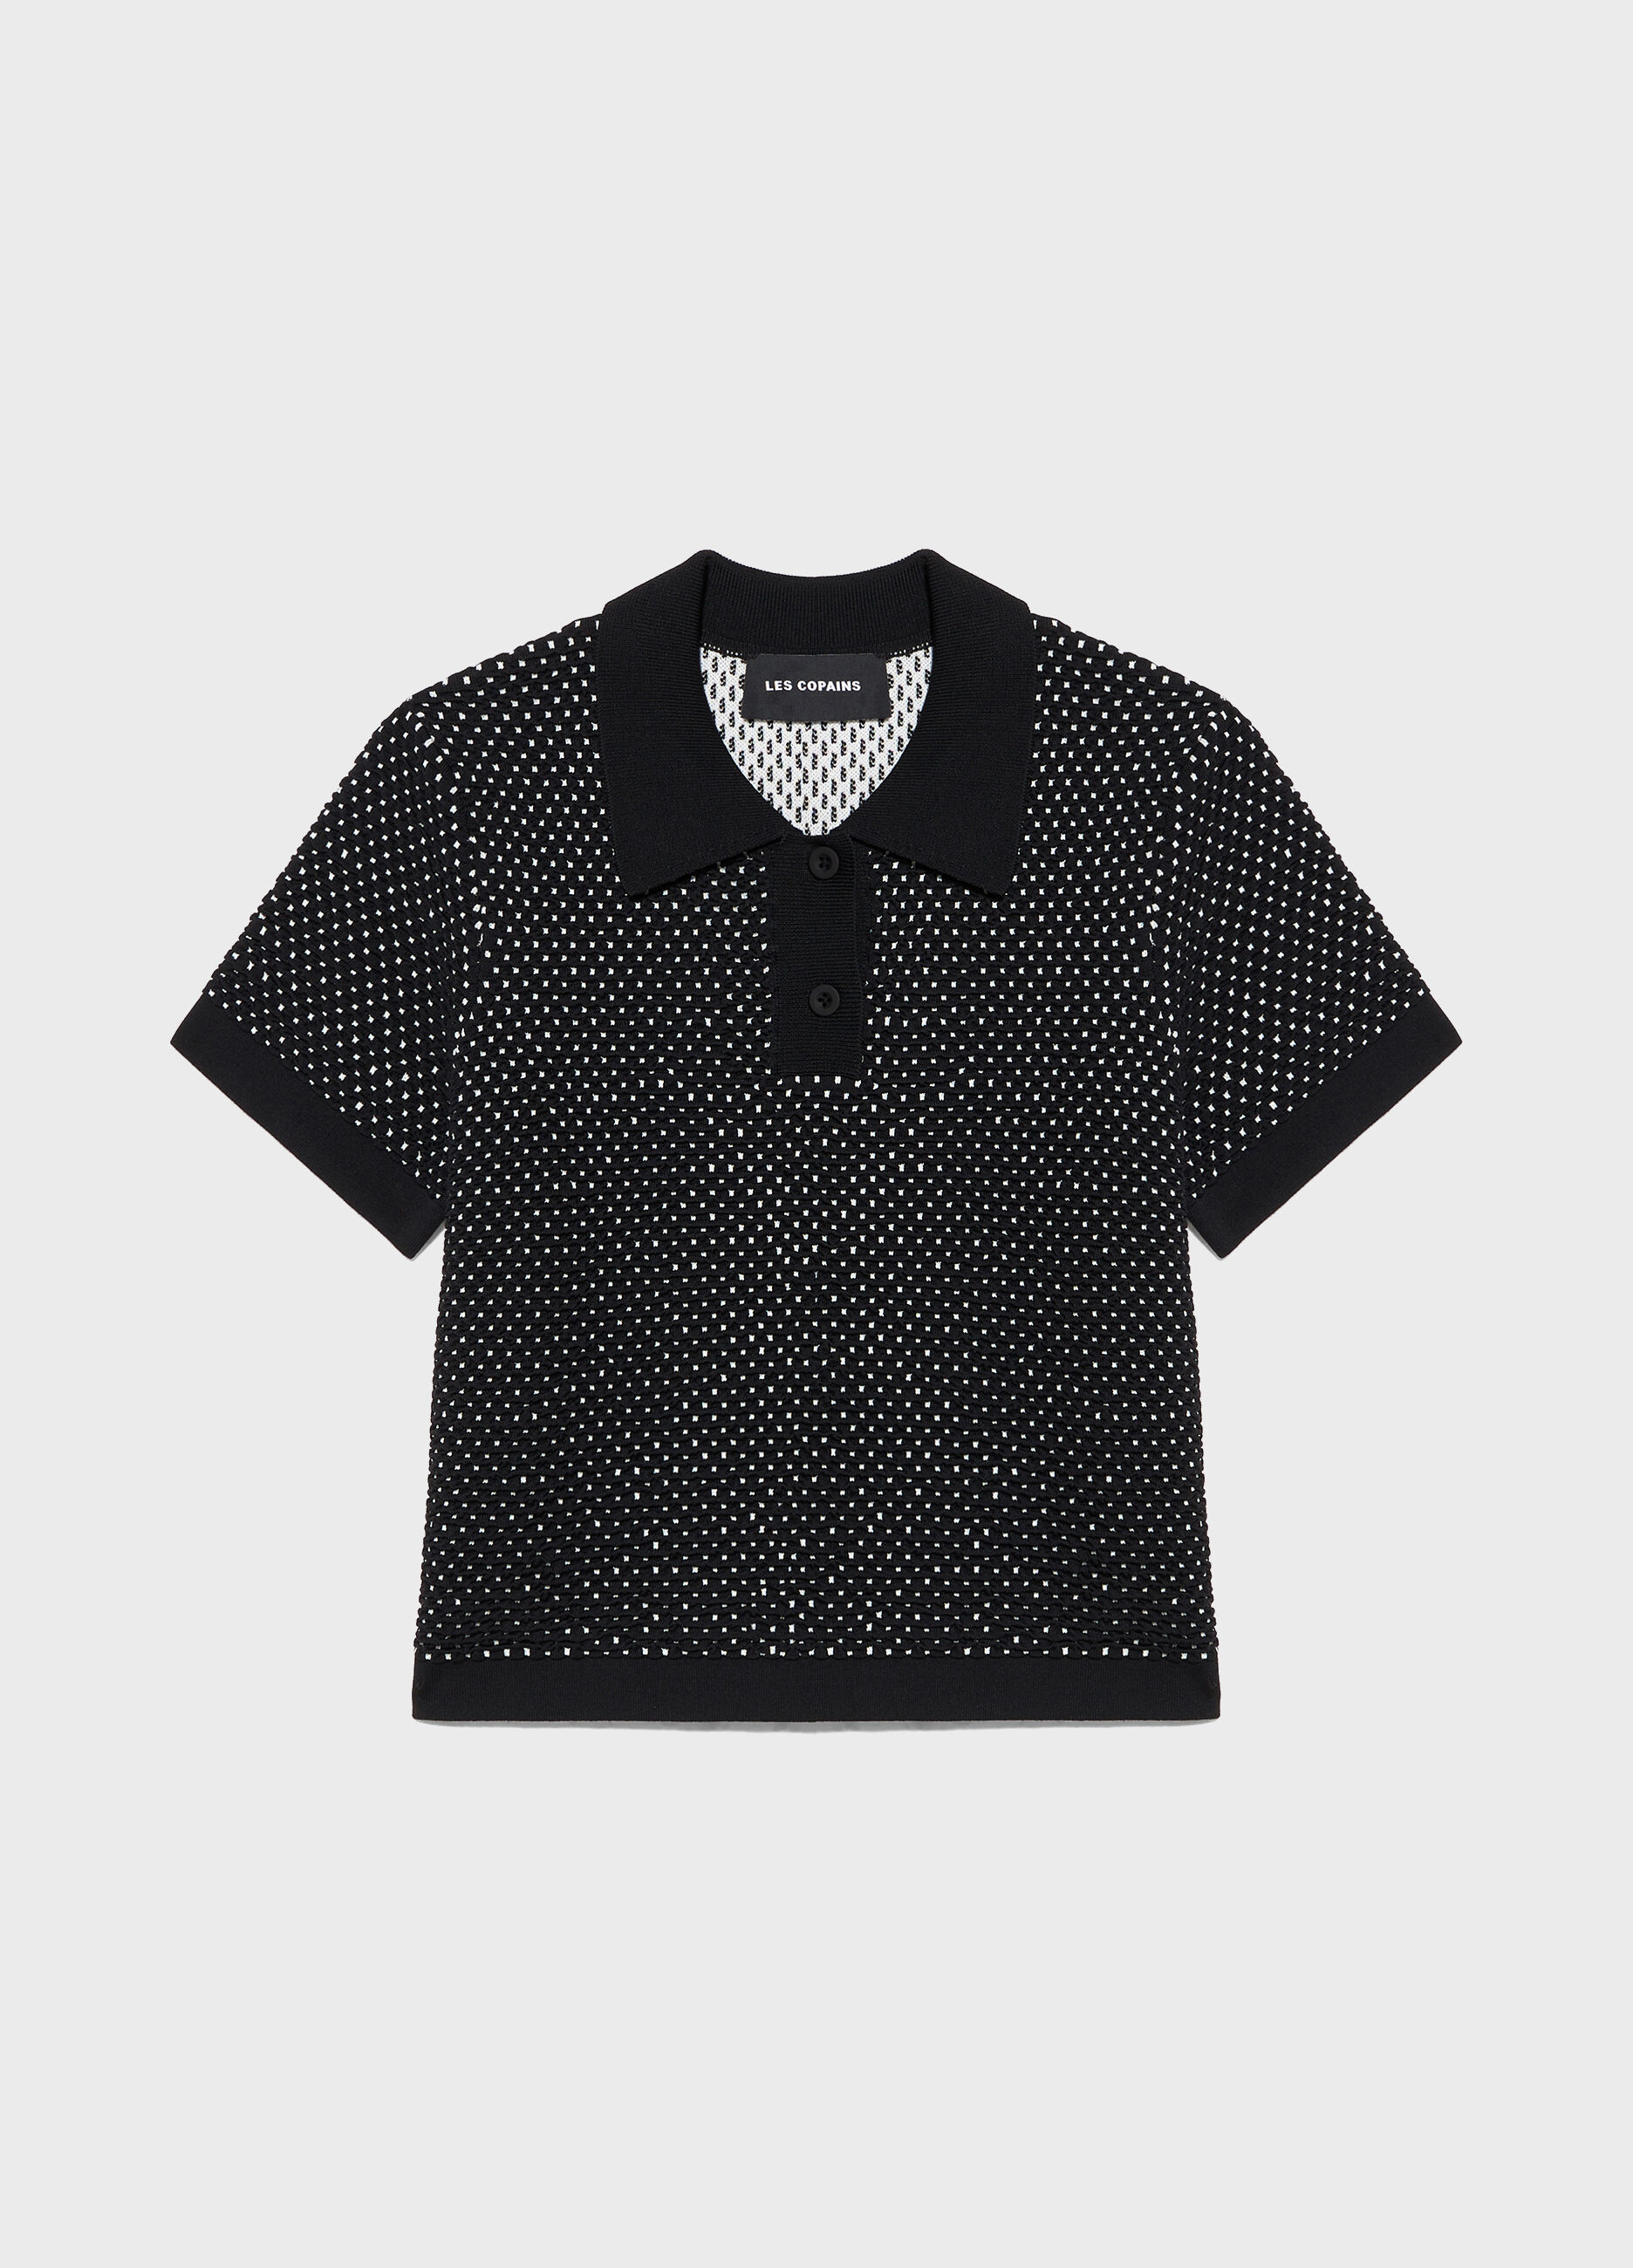 Jacquard knit tricot t-shirt with short sleeves_4